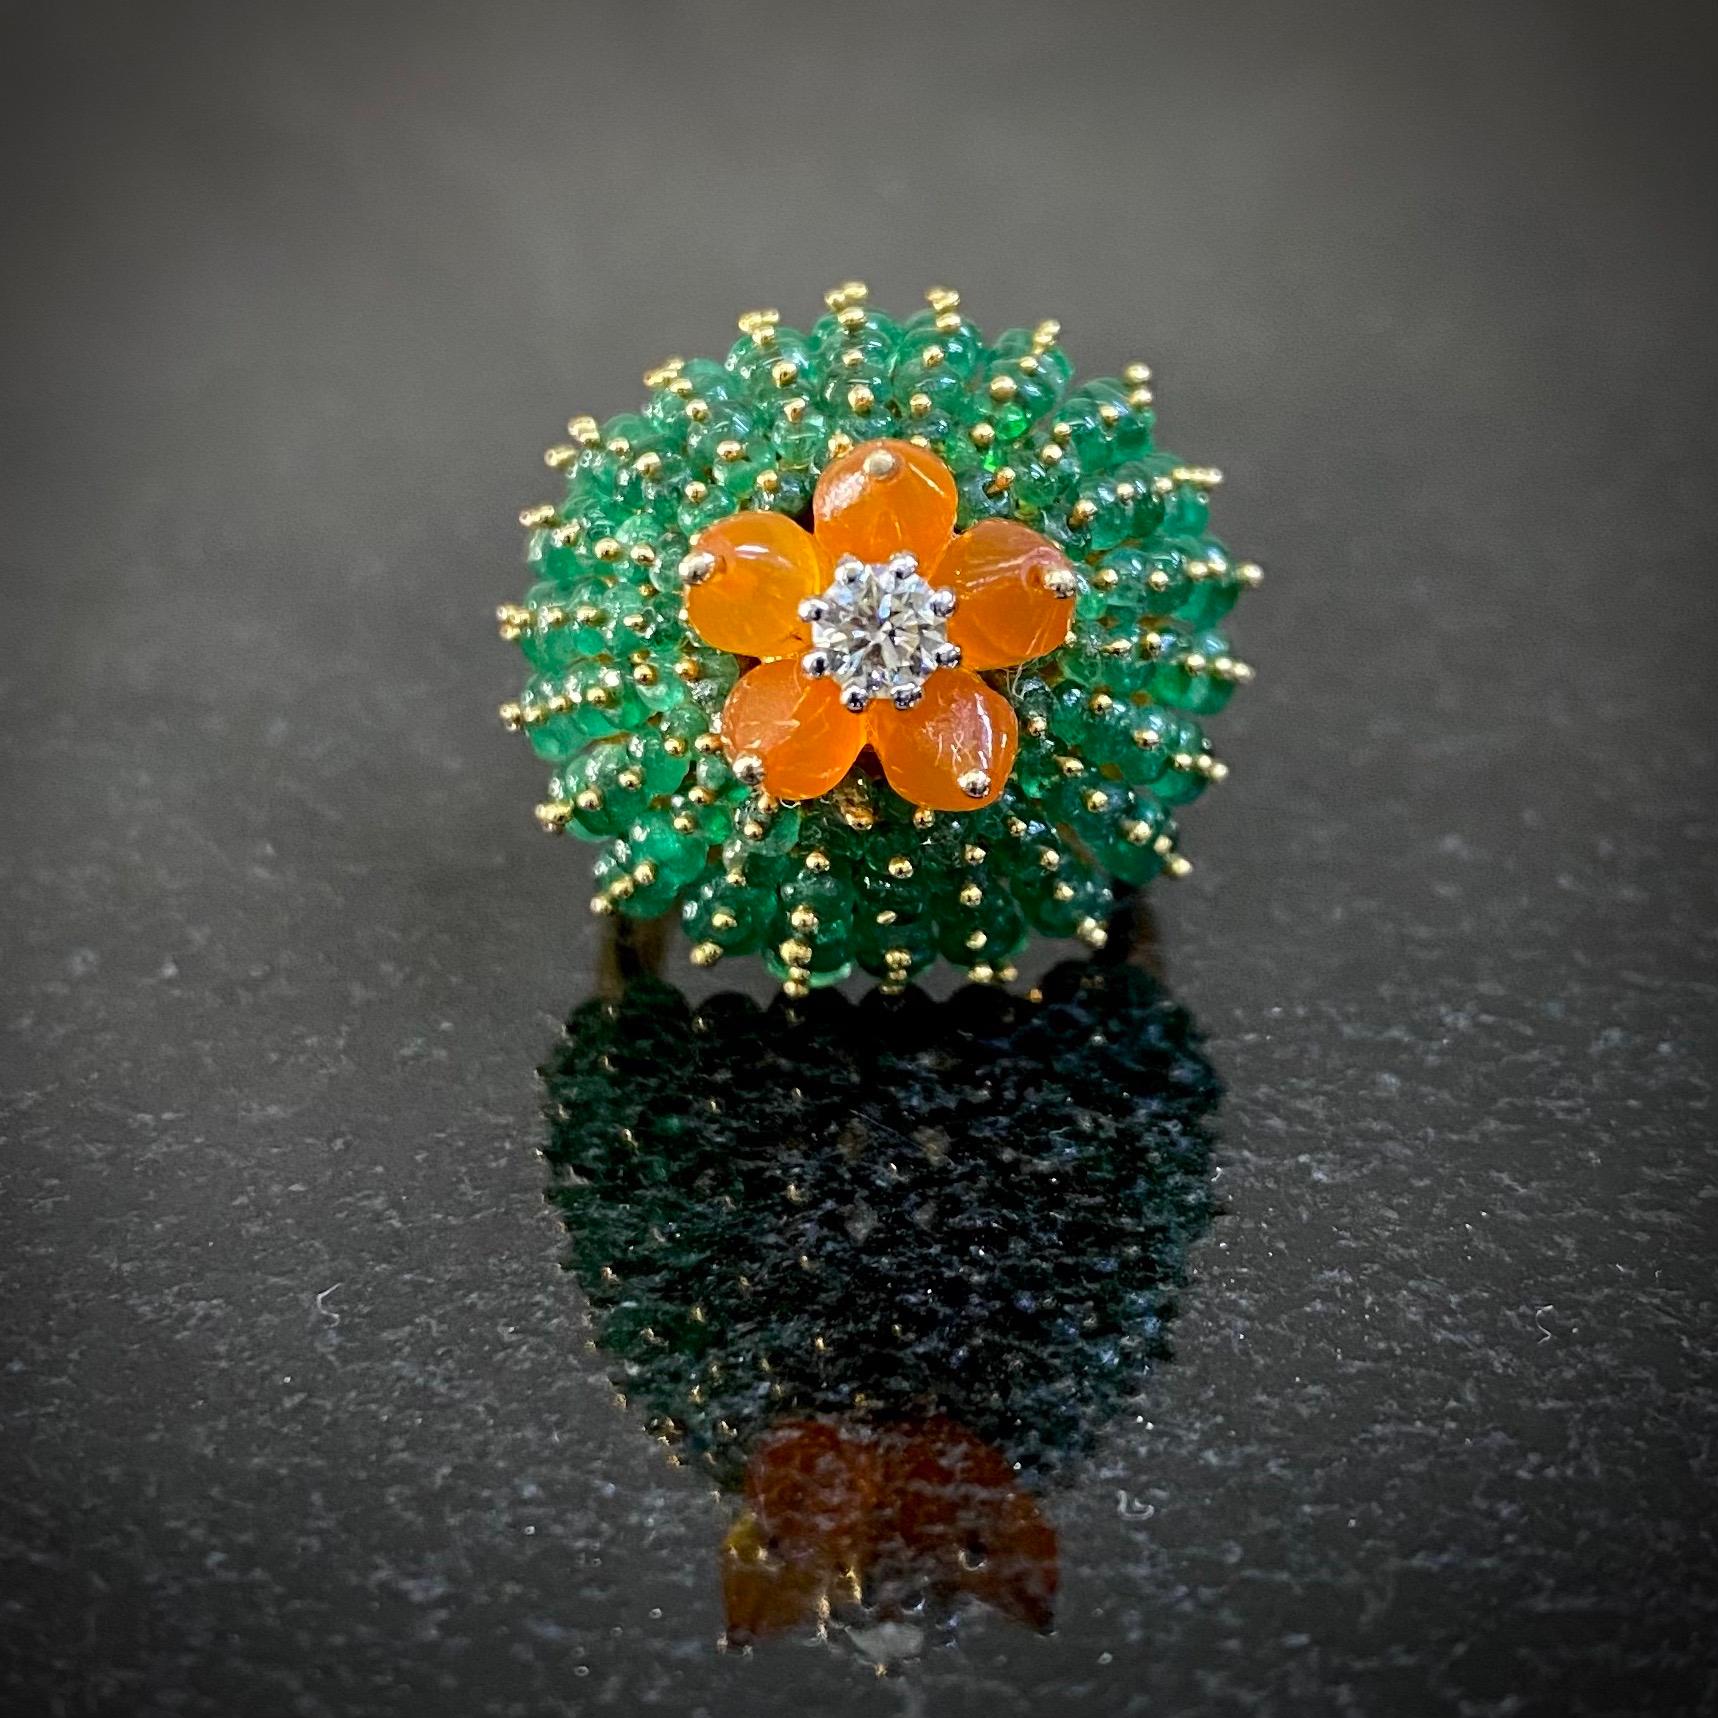 Vintage emerald, fire opal and diamond bombé cactus cocktail ring in 18kt yellow gold, 1990s. Designed in the manner of Cartier’s Cactus ring, this sculptural dome ring makes a bold statement. It is modelled as a stylized cactus, the arms composed